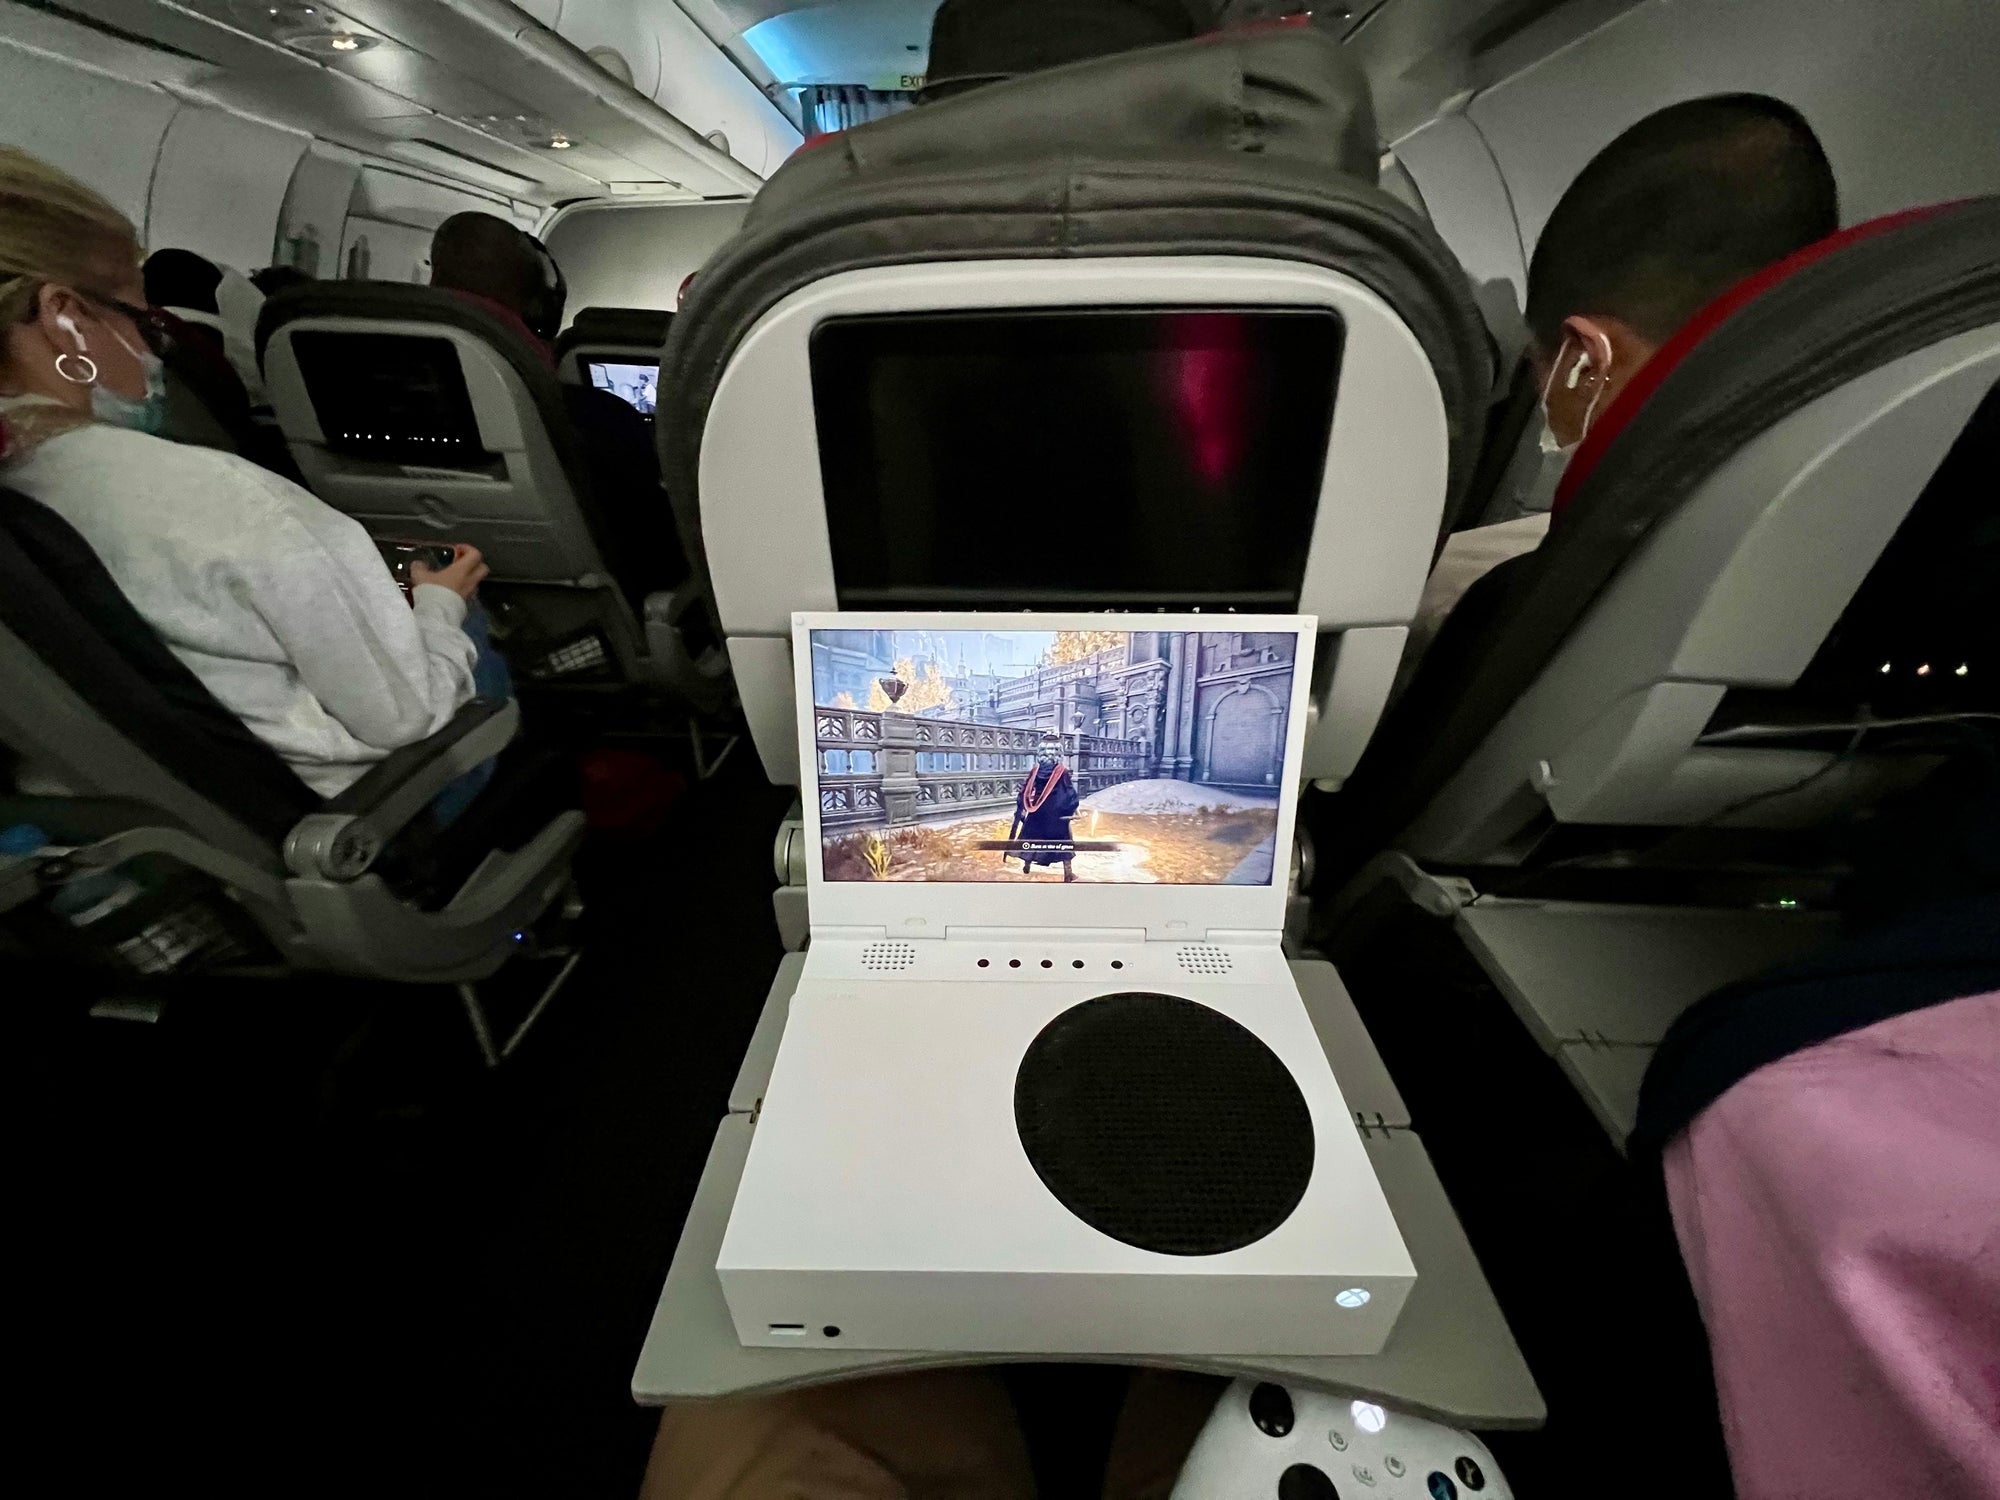 Our Experience Flying with xScreen